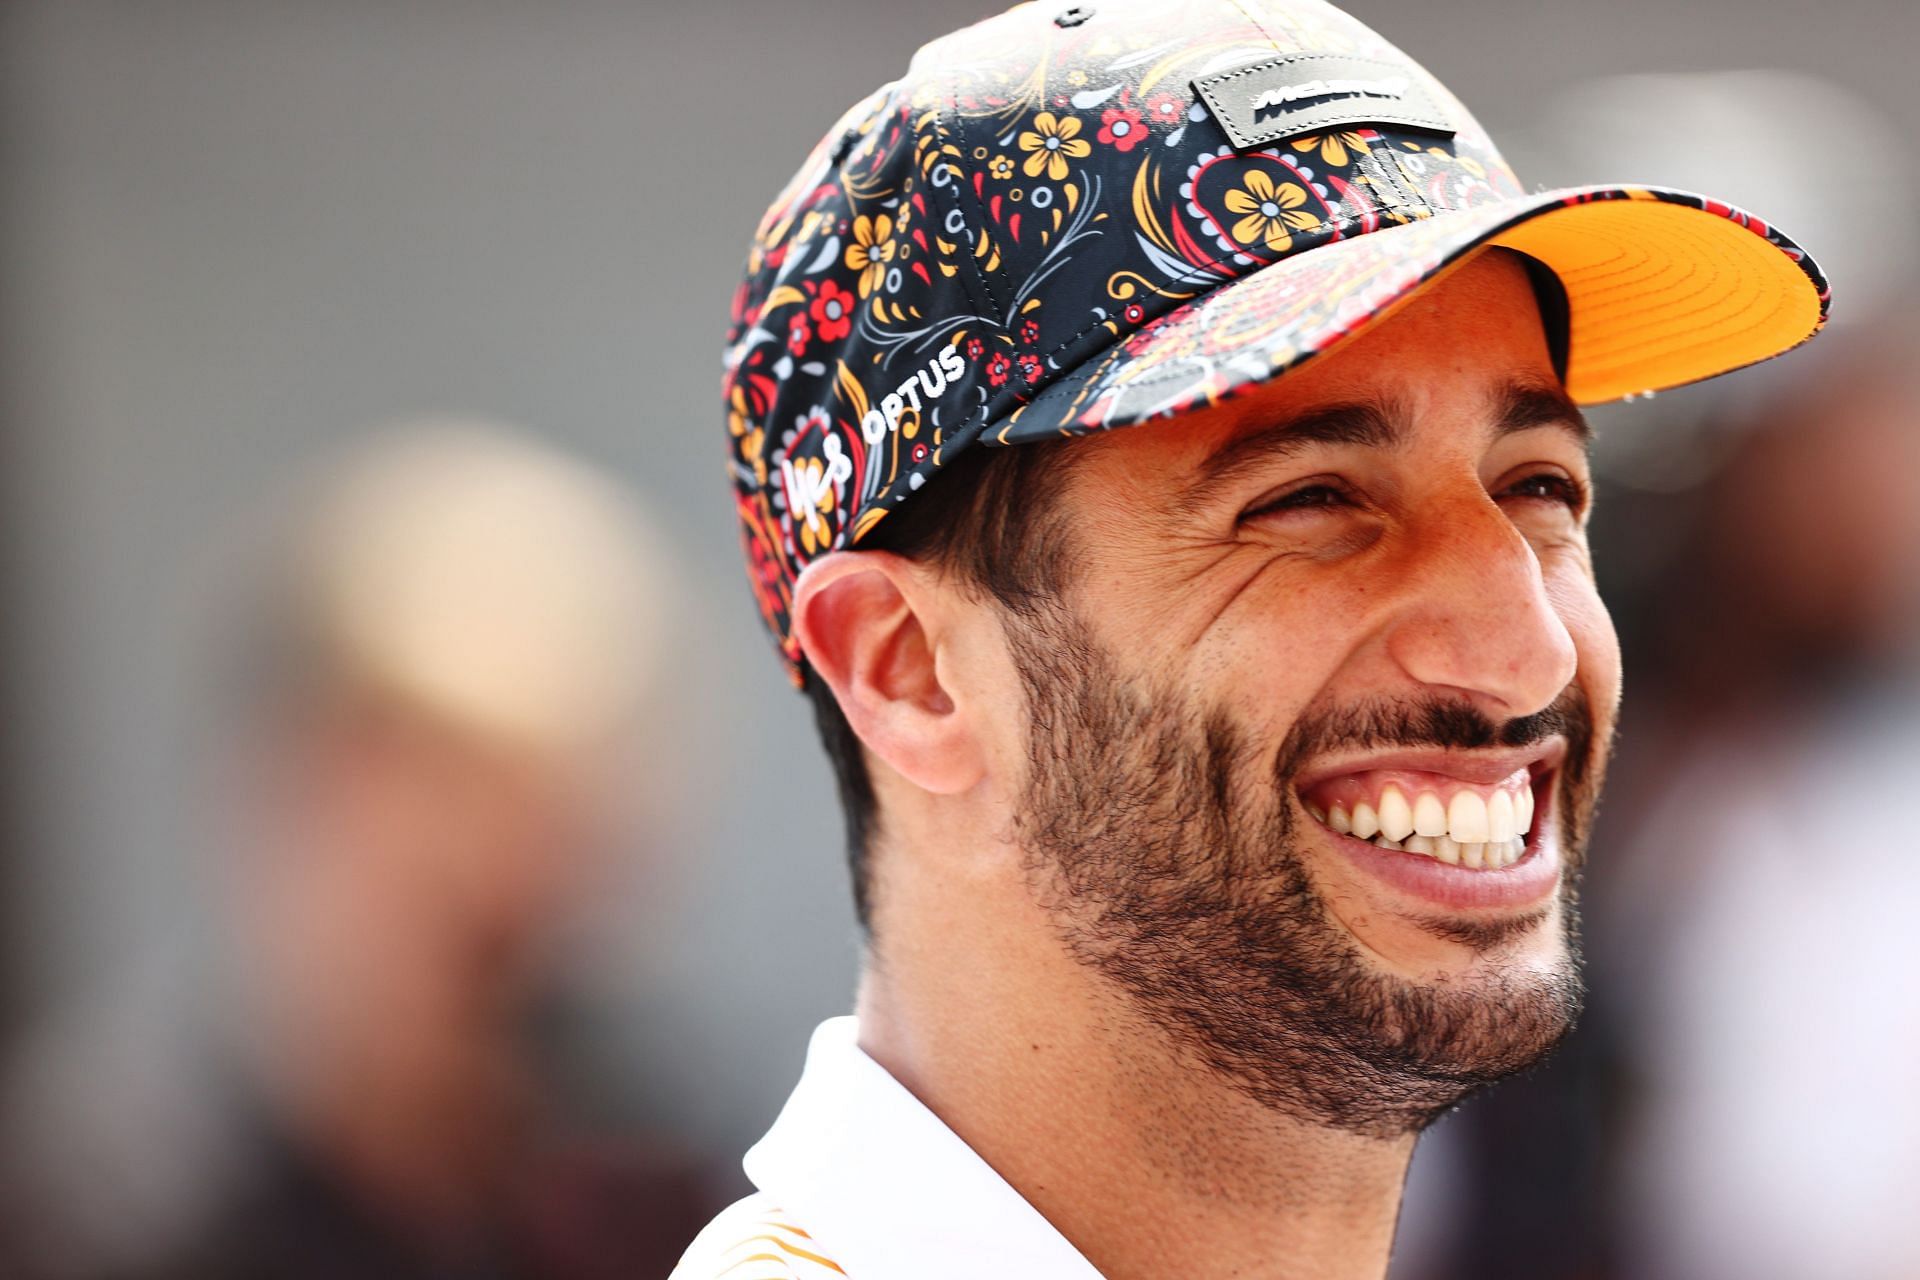 Daniel Ricciardo in the paddock ahead of the 2021 Mexican GP. (Photo by Mark Thompson/Getty Images)